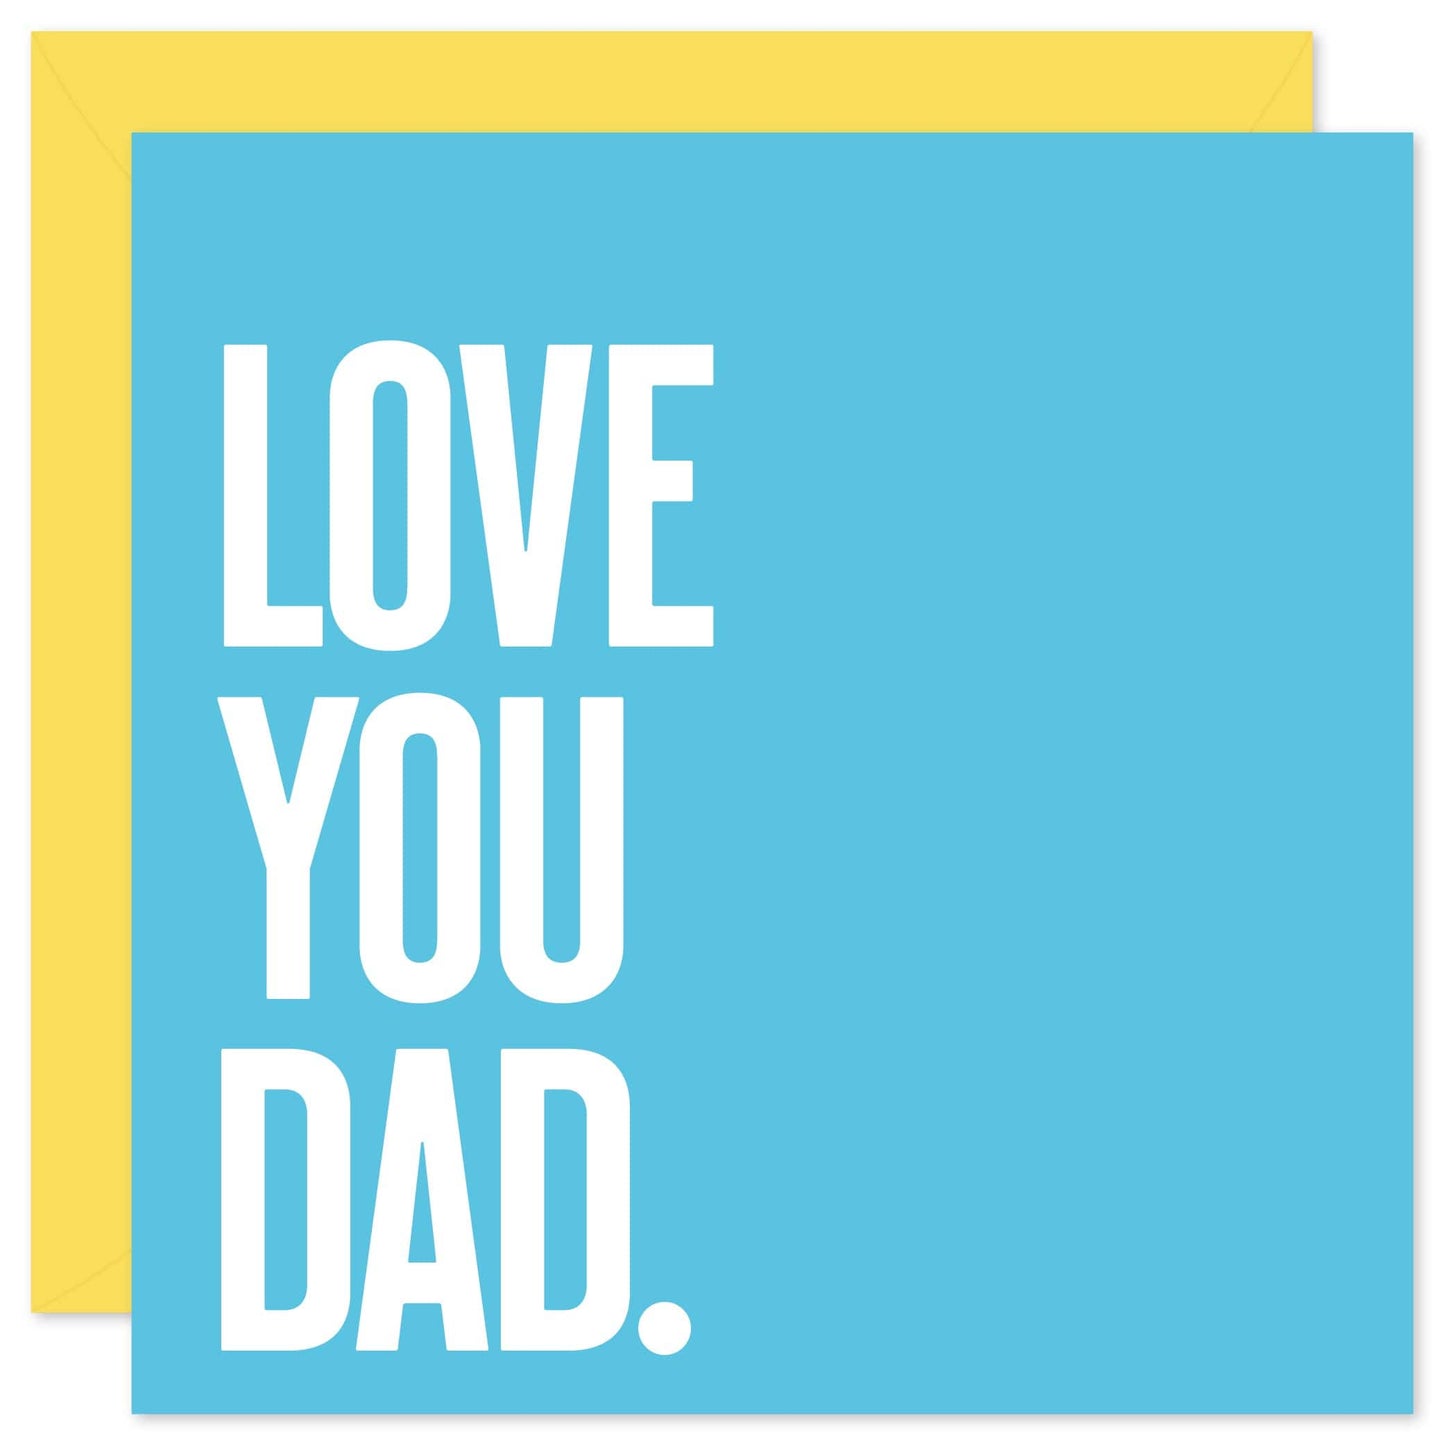 Love you dad greeting card from Purple Tree Designs